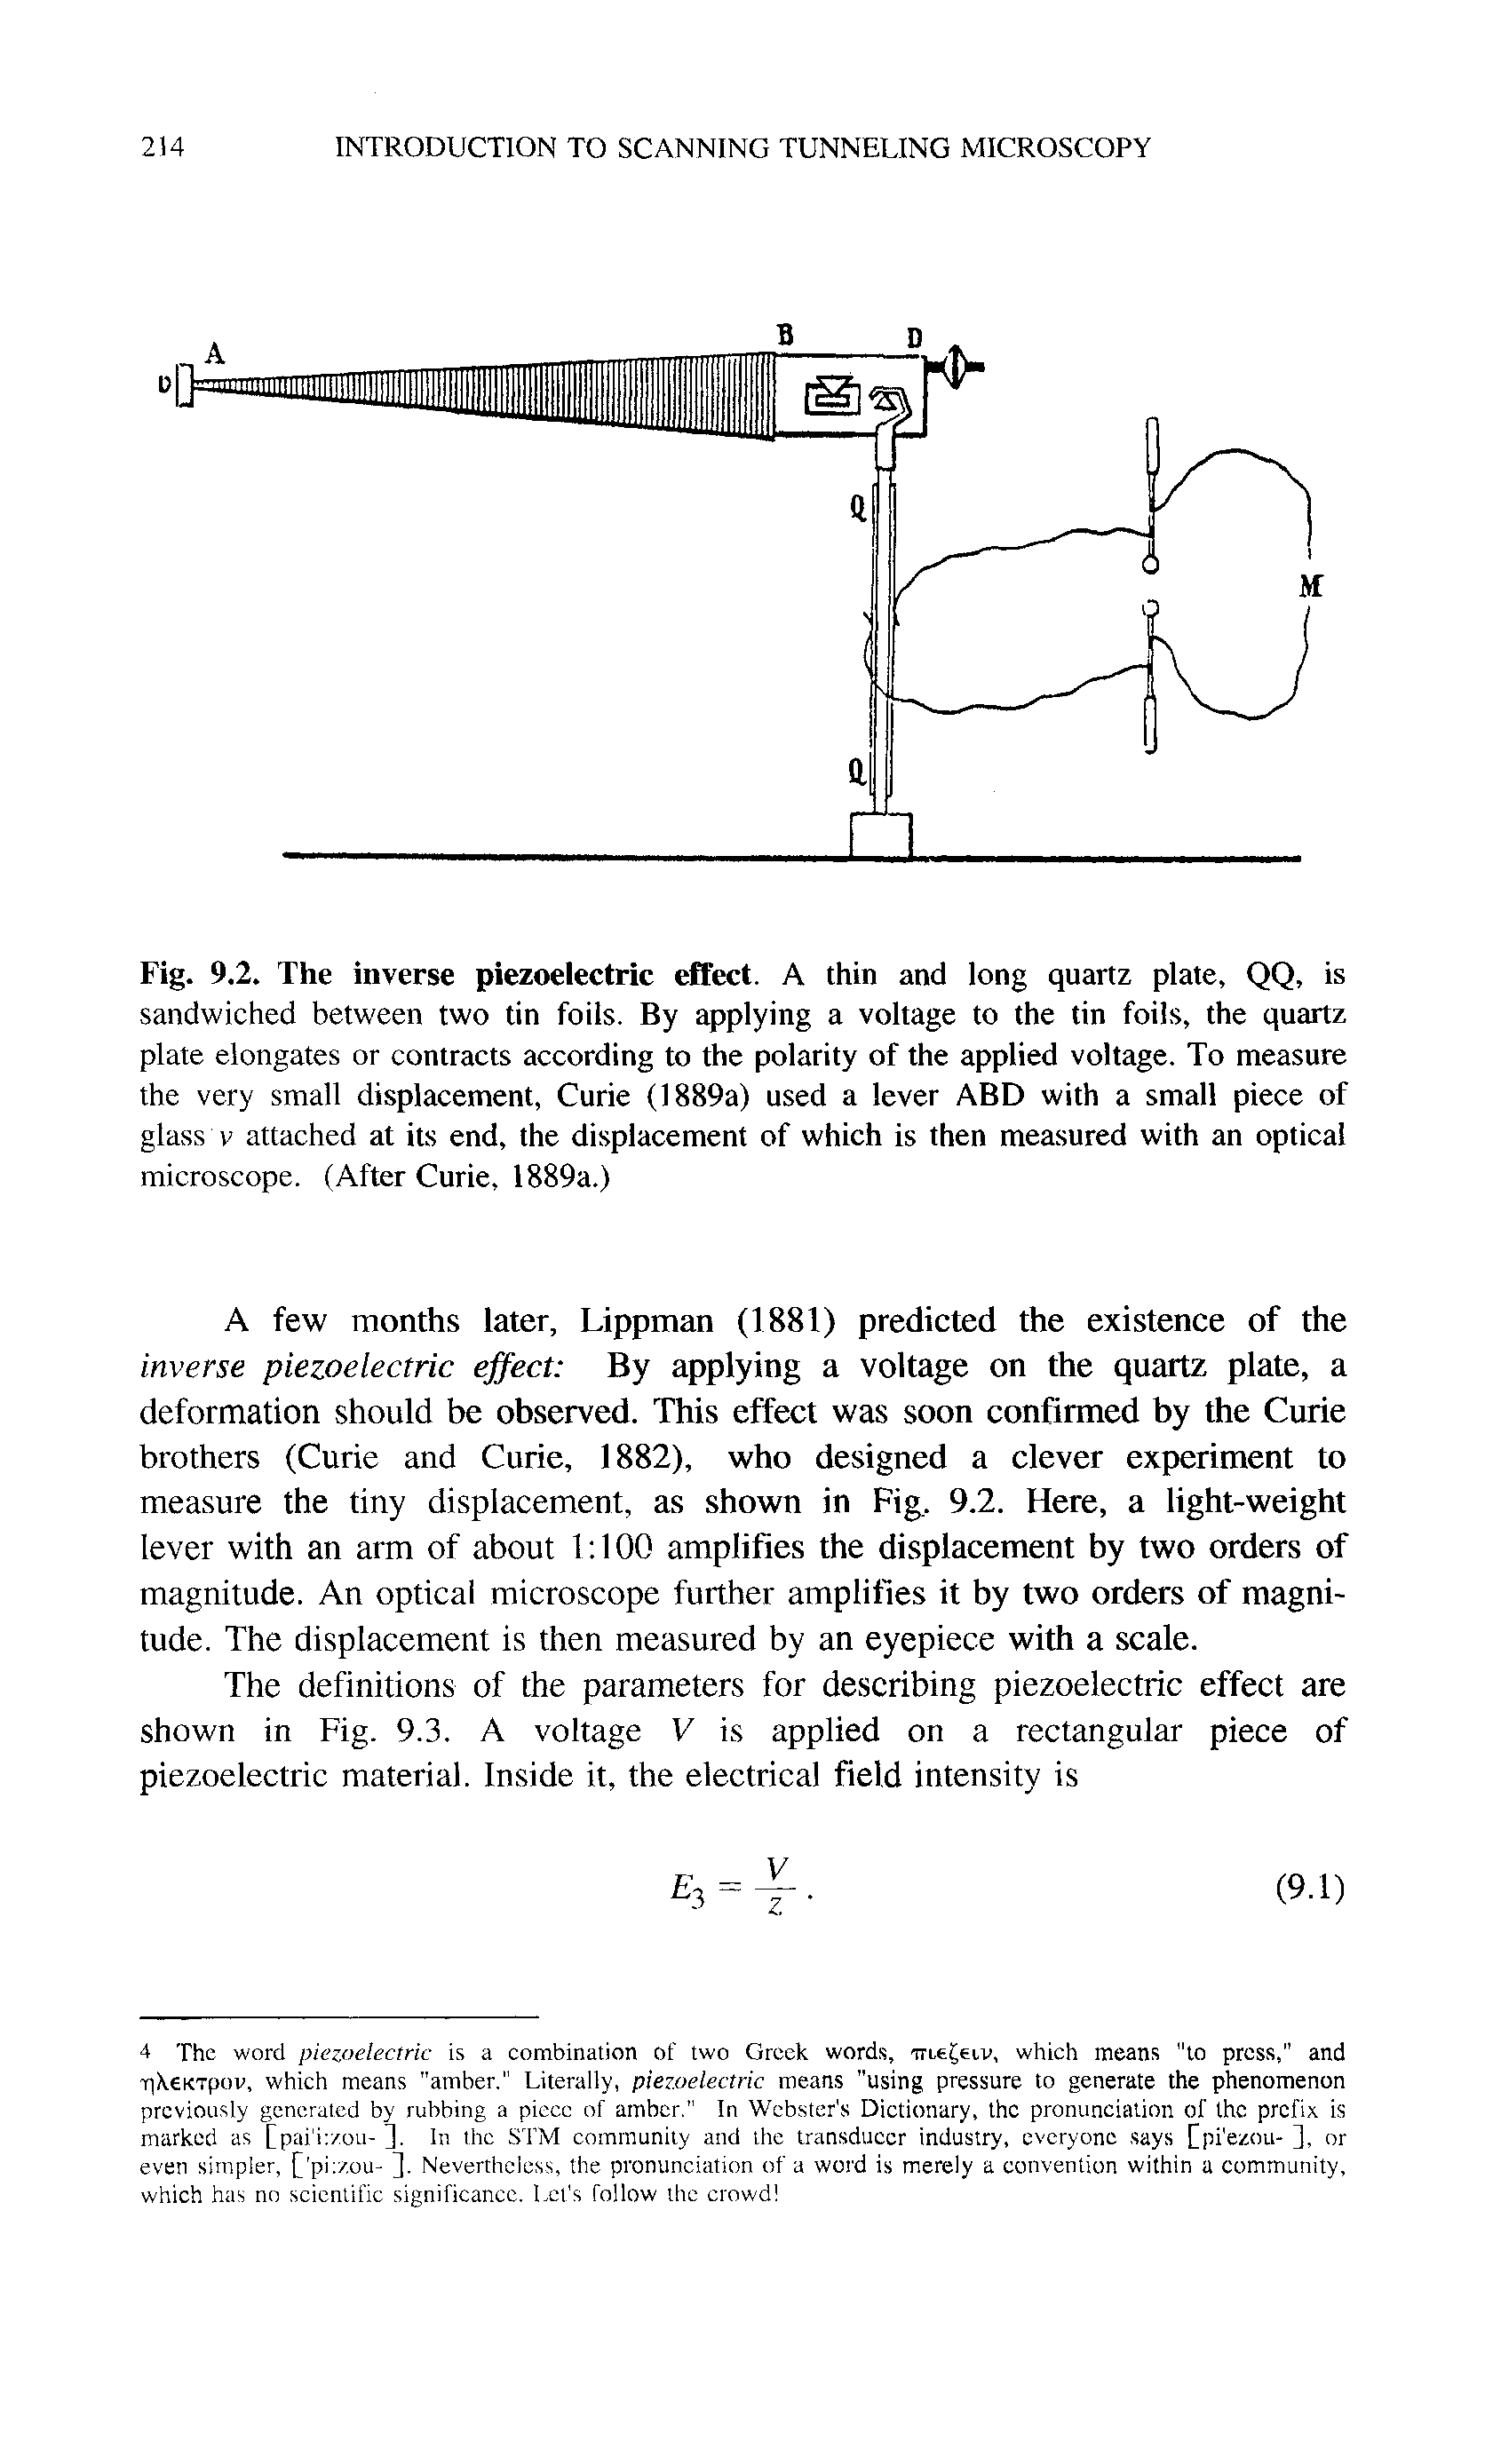 Fig. 9.2. The inverse piezoelectric effect. A thin and long quartz plate, QQ, is sandwiched between two tin foils. By applying a voltage to the tin foils, the quartz plate elongates or contracts according to the polarity of the applied voltage. To measure the very small displacement. Curie (1889a) used a lever ABD with a small piece of glass V attached at its end, the displacement of which is then measured with an optical microscope. (After Curie, 1889a.)...